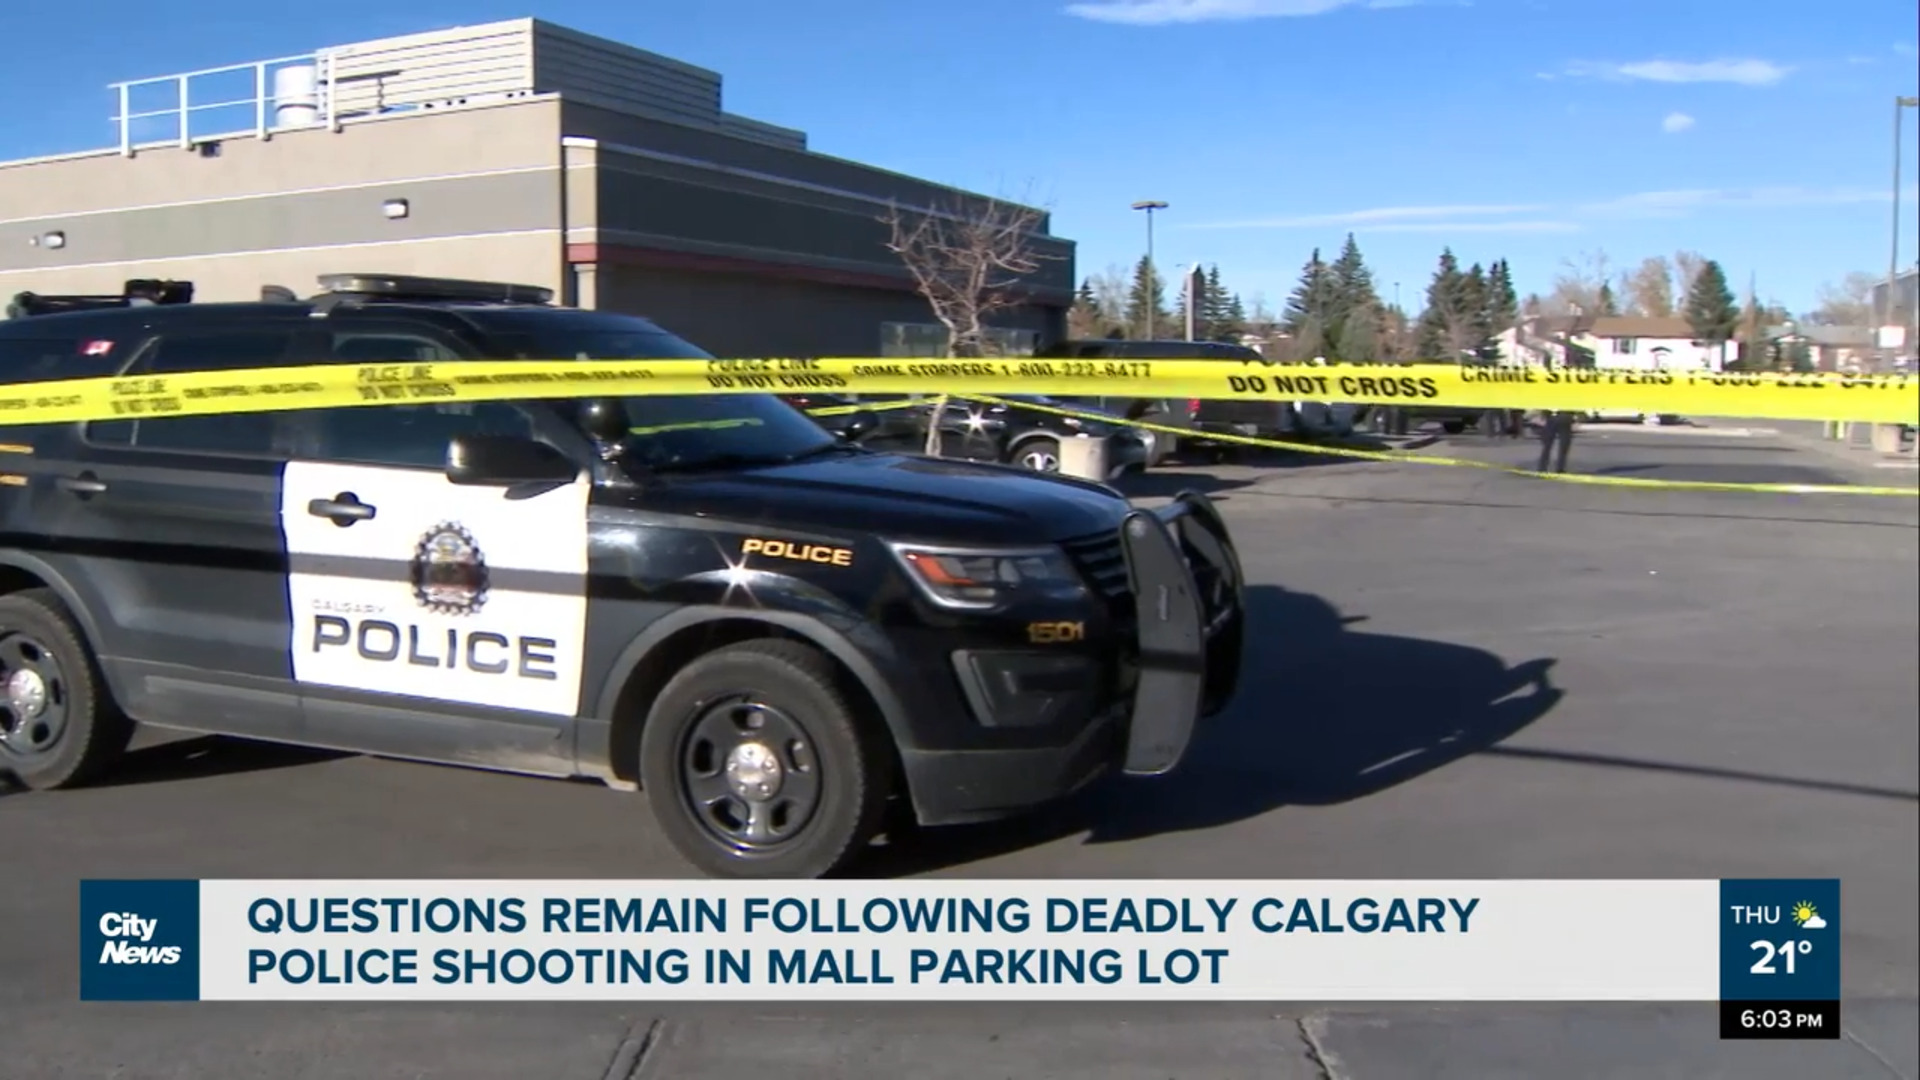 Questions remain following deadly Calgary police shooting